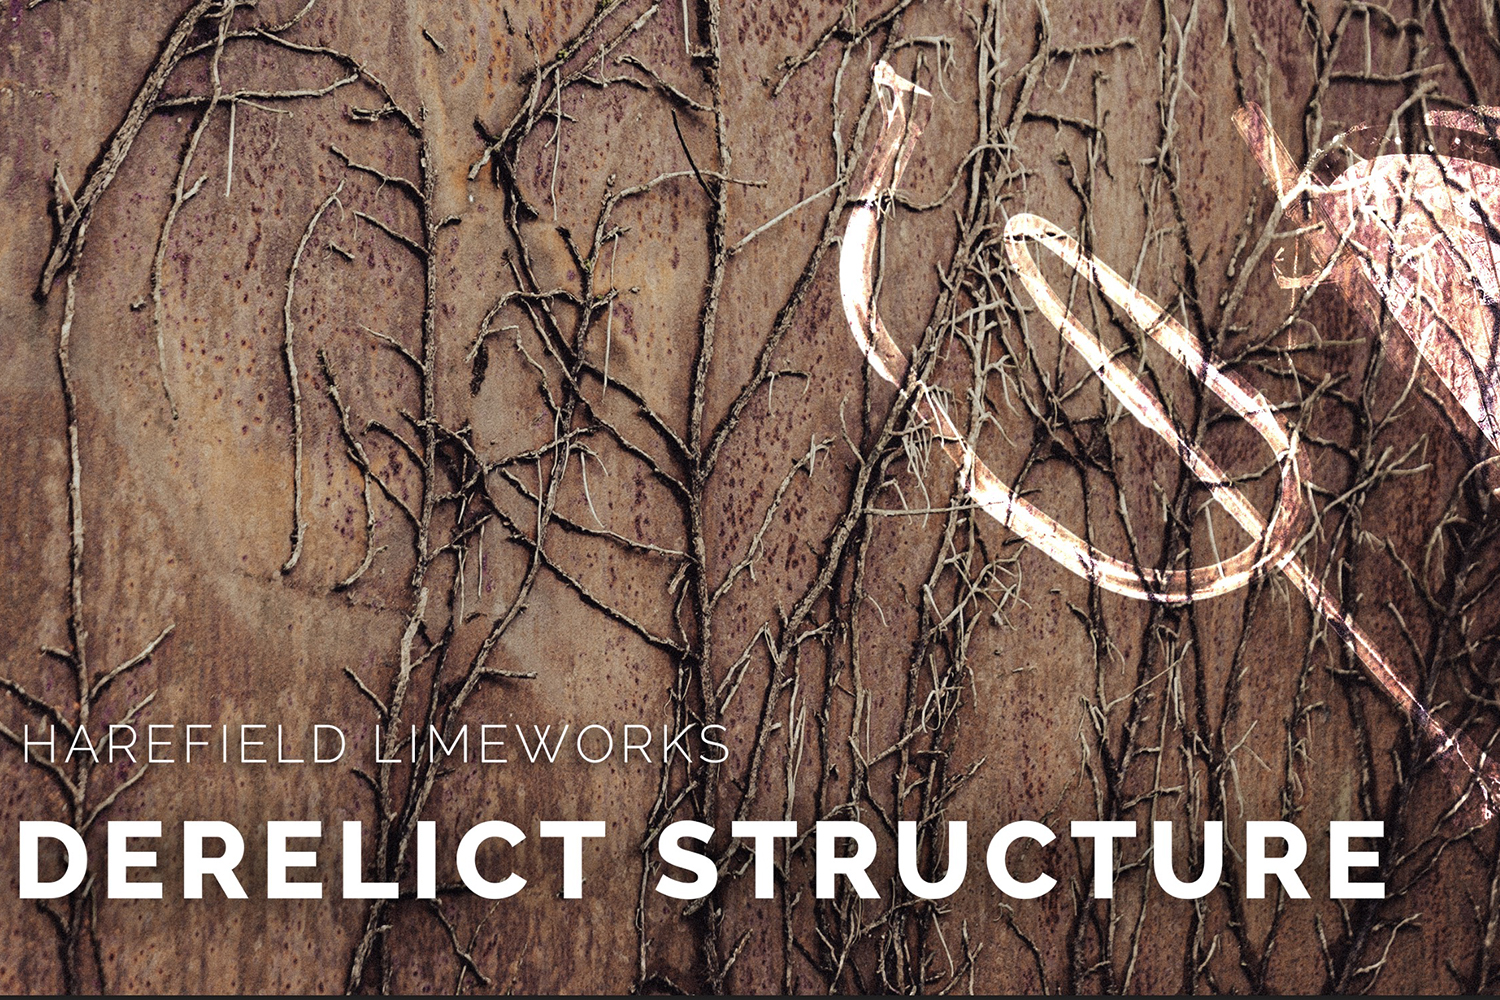 The words 'Harefield Limeworks Derelict Structure' written in white written over an abstract image which appears to be the bark of a tree